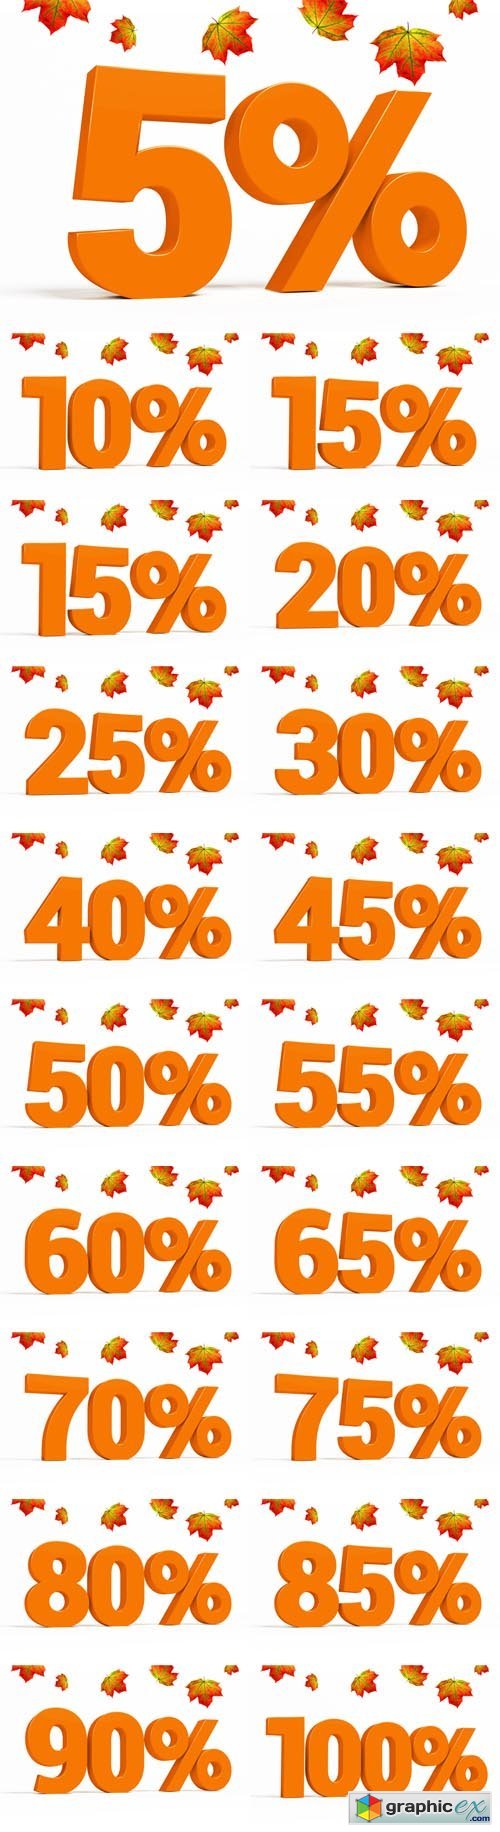 Orange 3D Percent Text on White Background with Leaves for Autumn Sale Campaigns